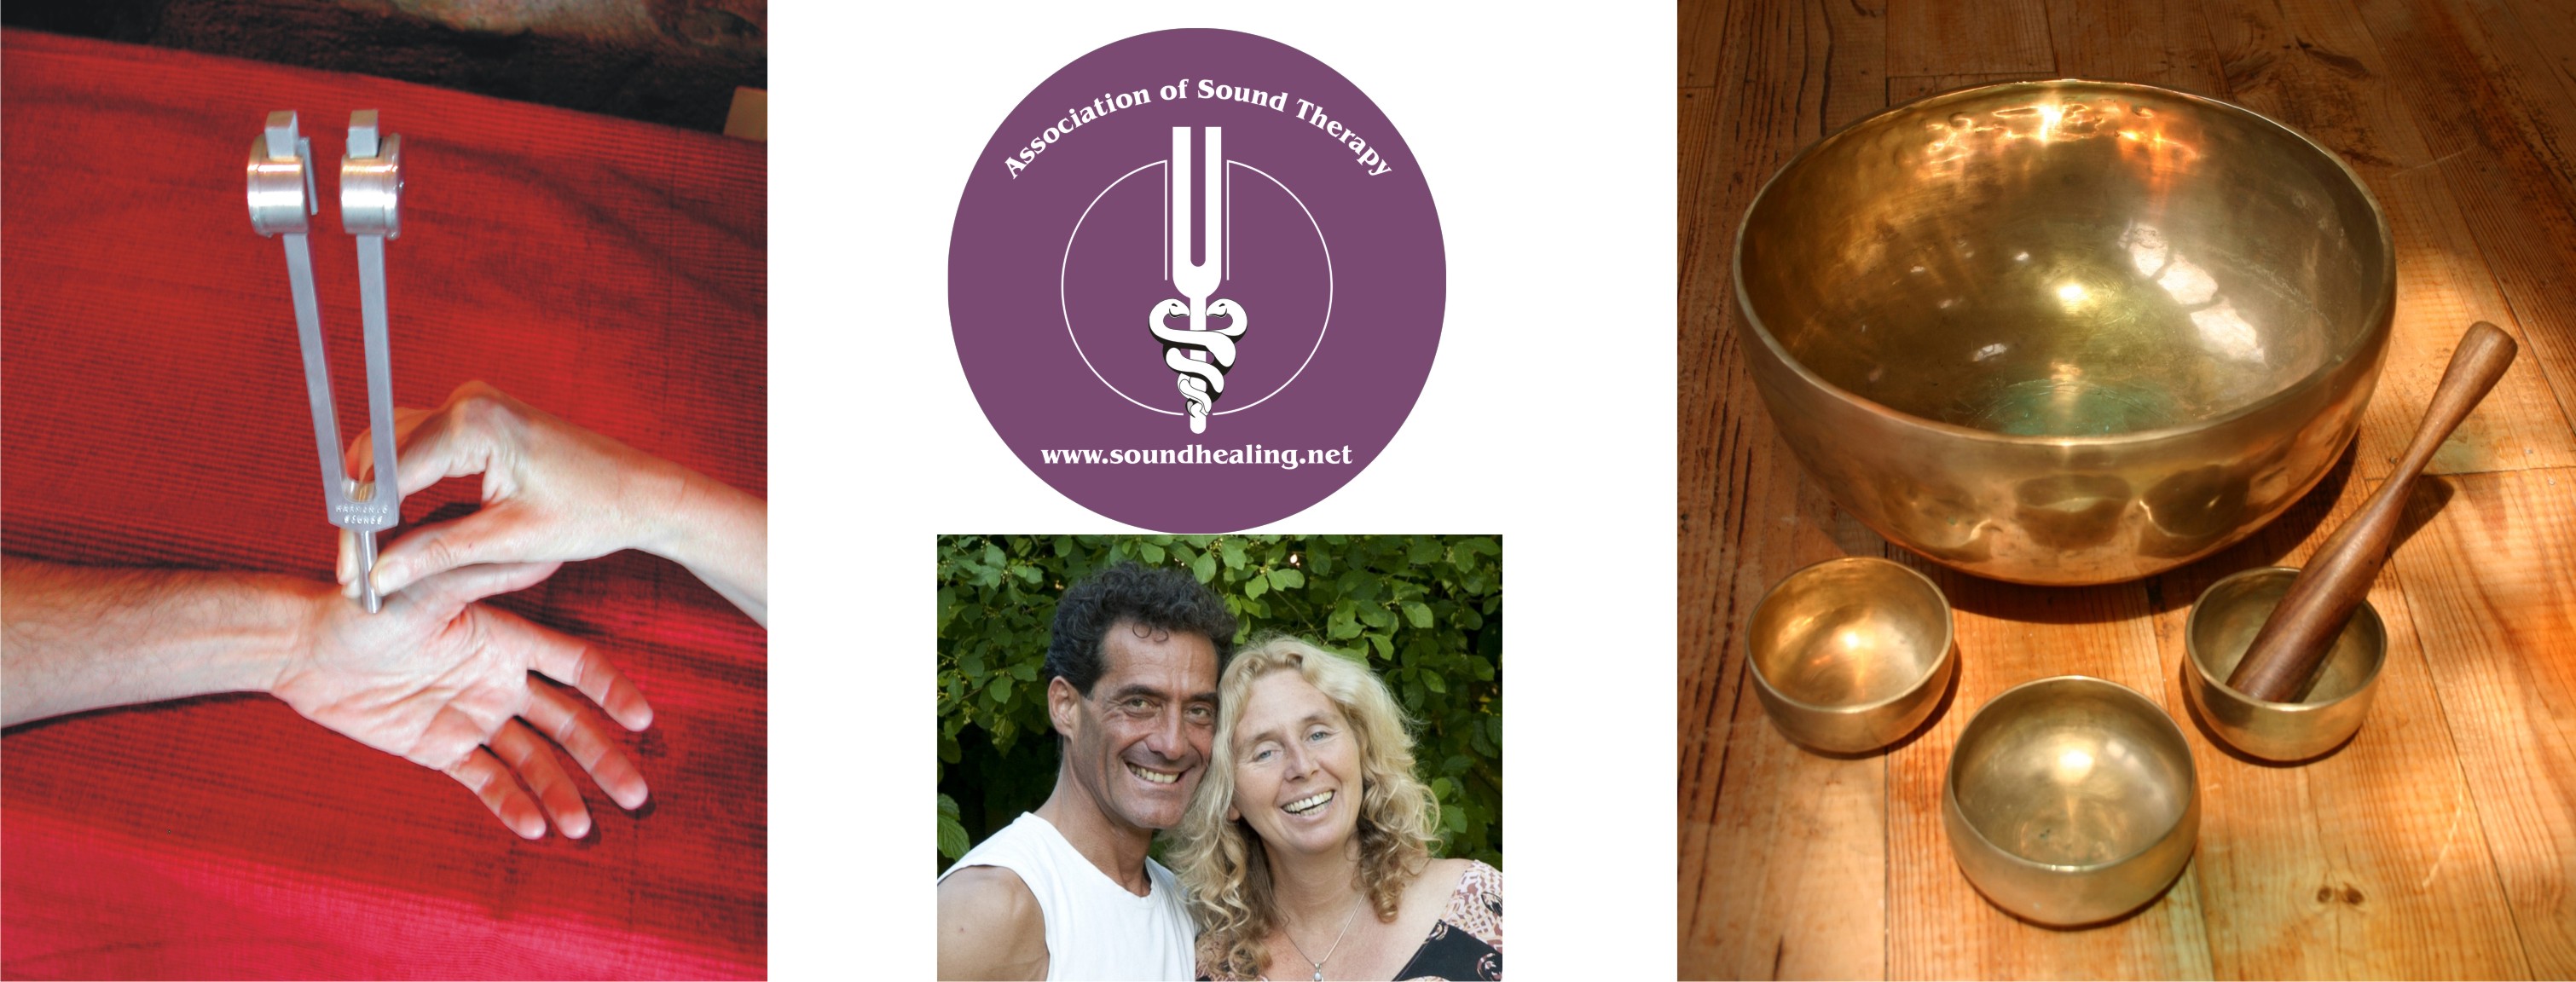 ALICANTE, SPAIN   - Summer SOUND HEALING Intensive "THE ENCHANTMENT"  18TH YEAR!